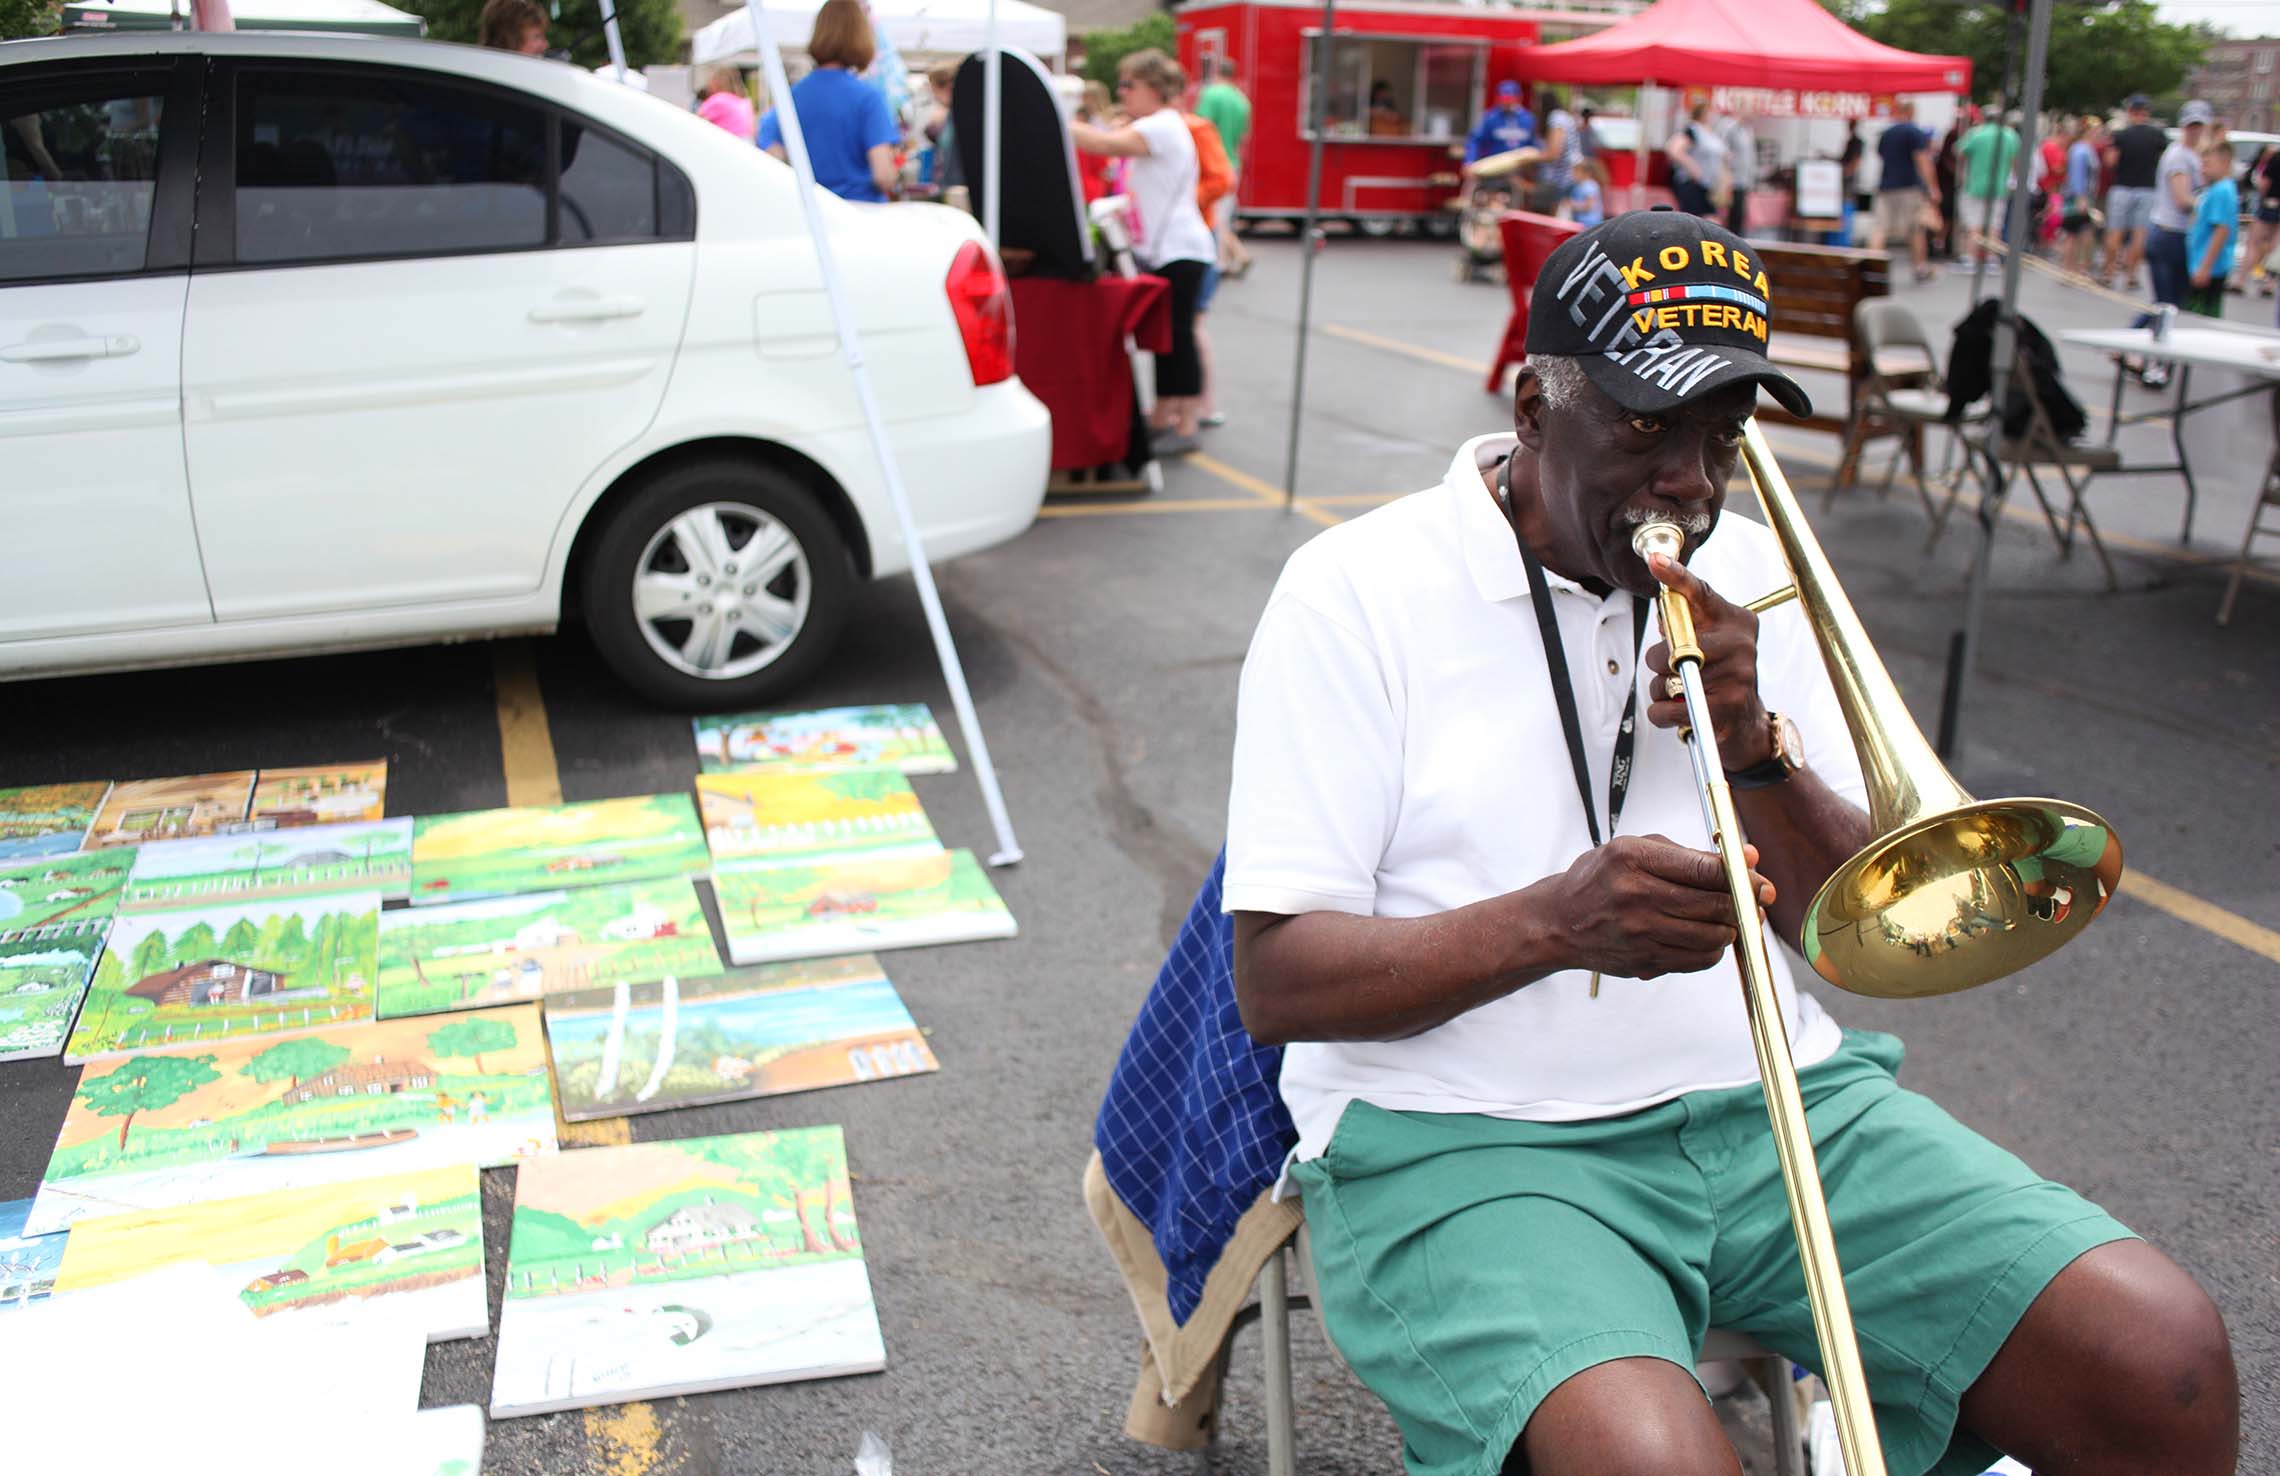  Willie Dixon, of Kankakee, plays the trombone Saturday during the Kankakee Farmers Market in downtown Kankakee. Dixon, a renaissance man, is a painter, playwright and musician. He grew up on the South Side of Chicago and grew to appreciate the impor